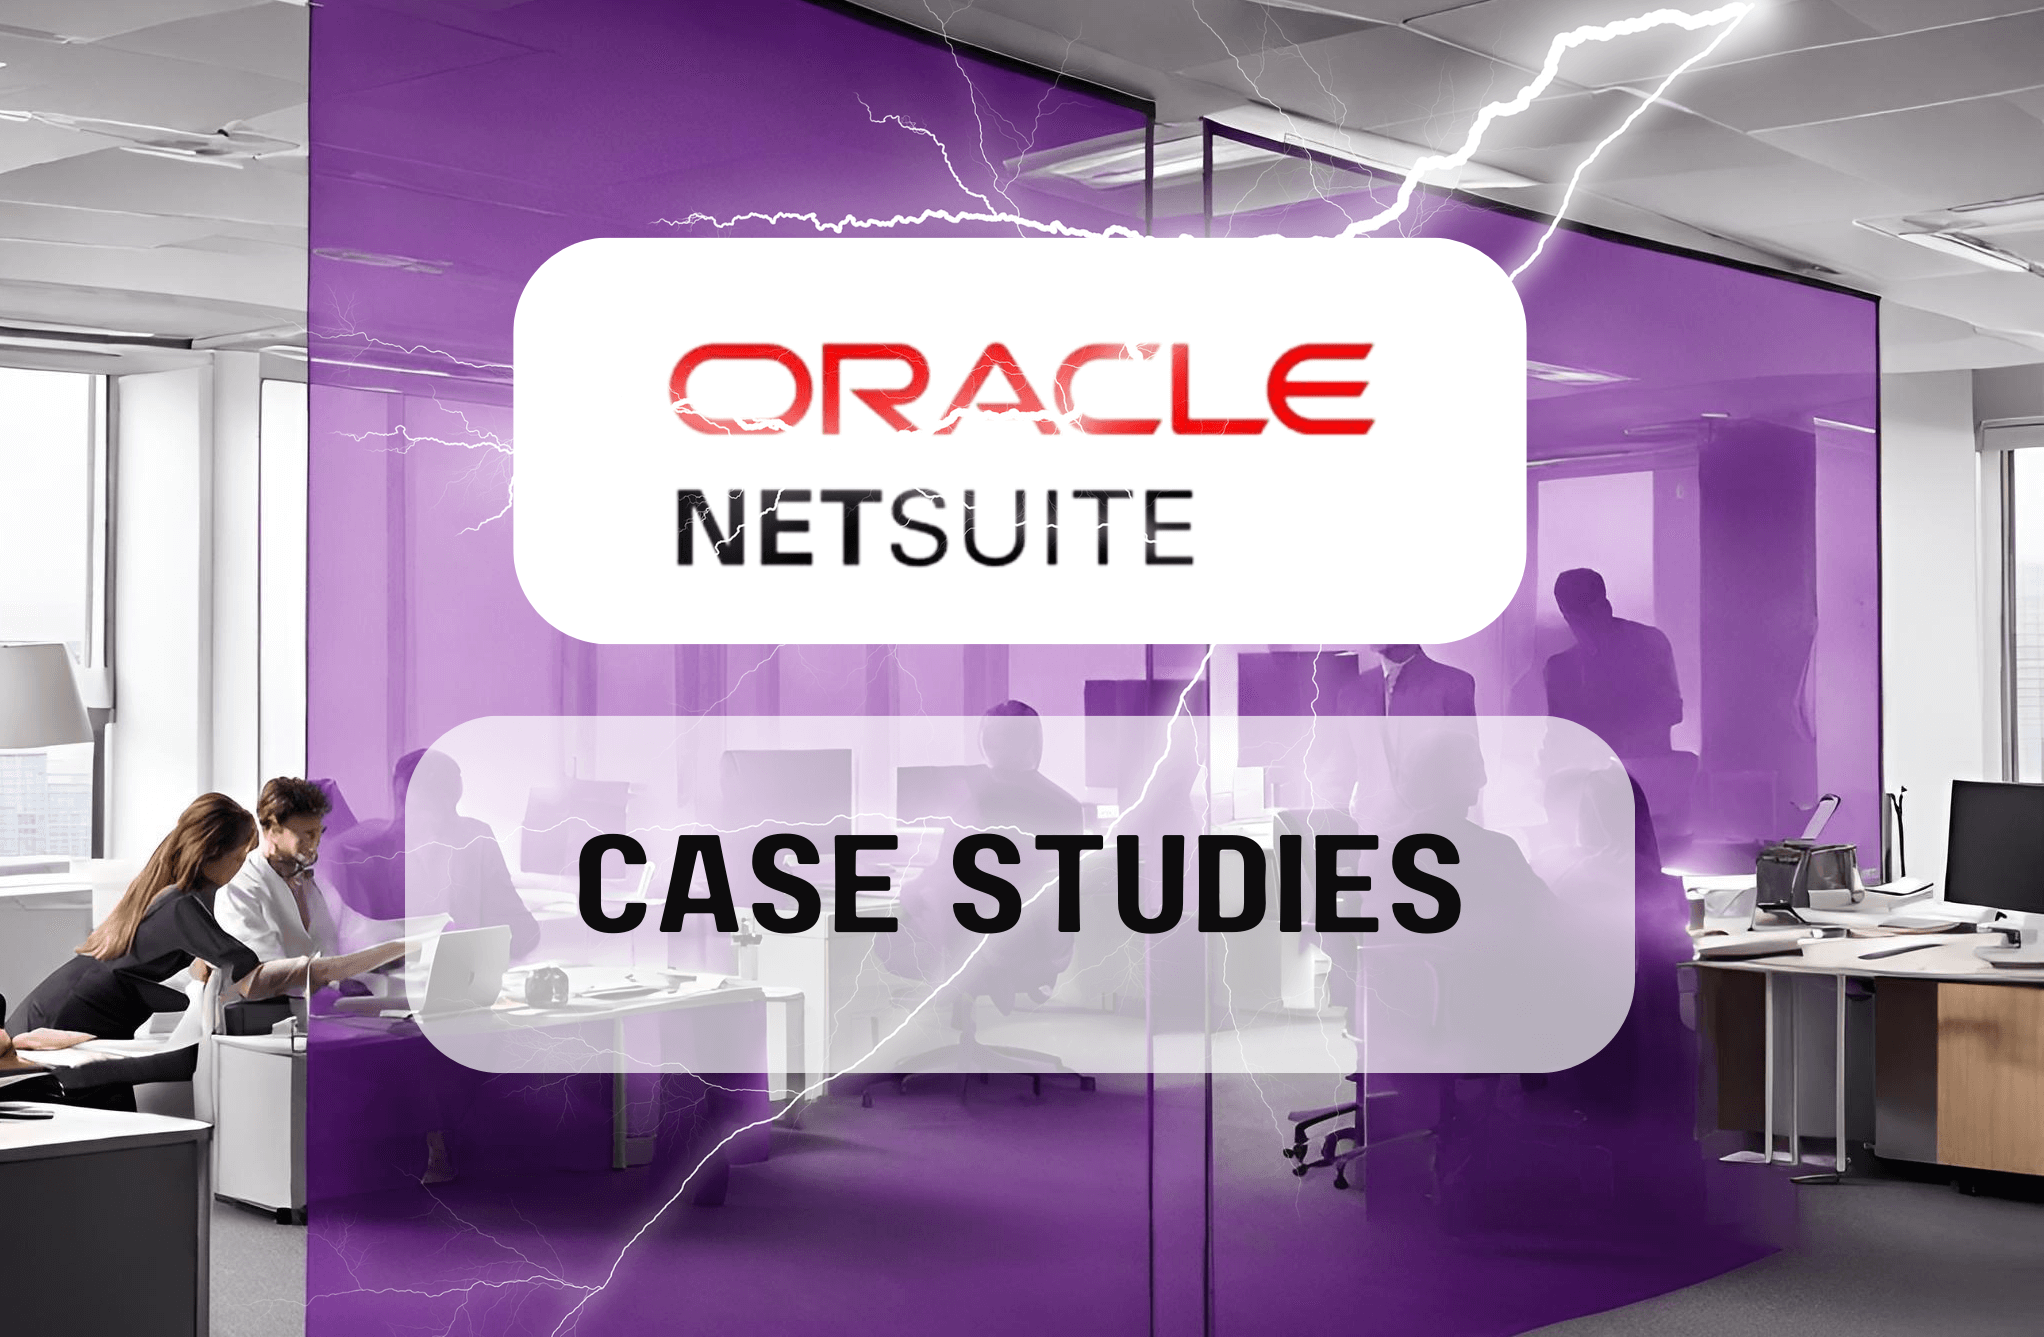 Which companies use NetSuite? 5 NetSuite Case Studies Revealed